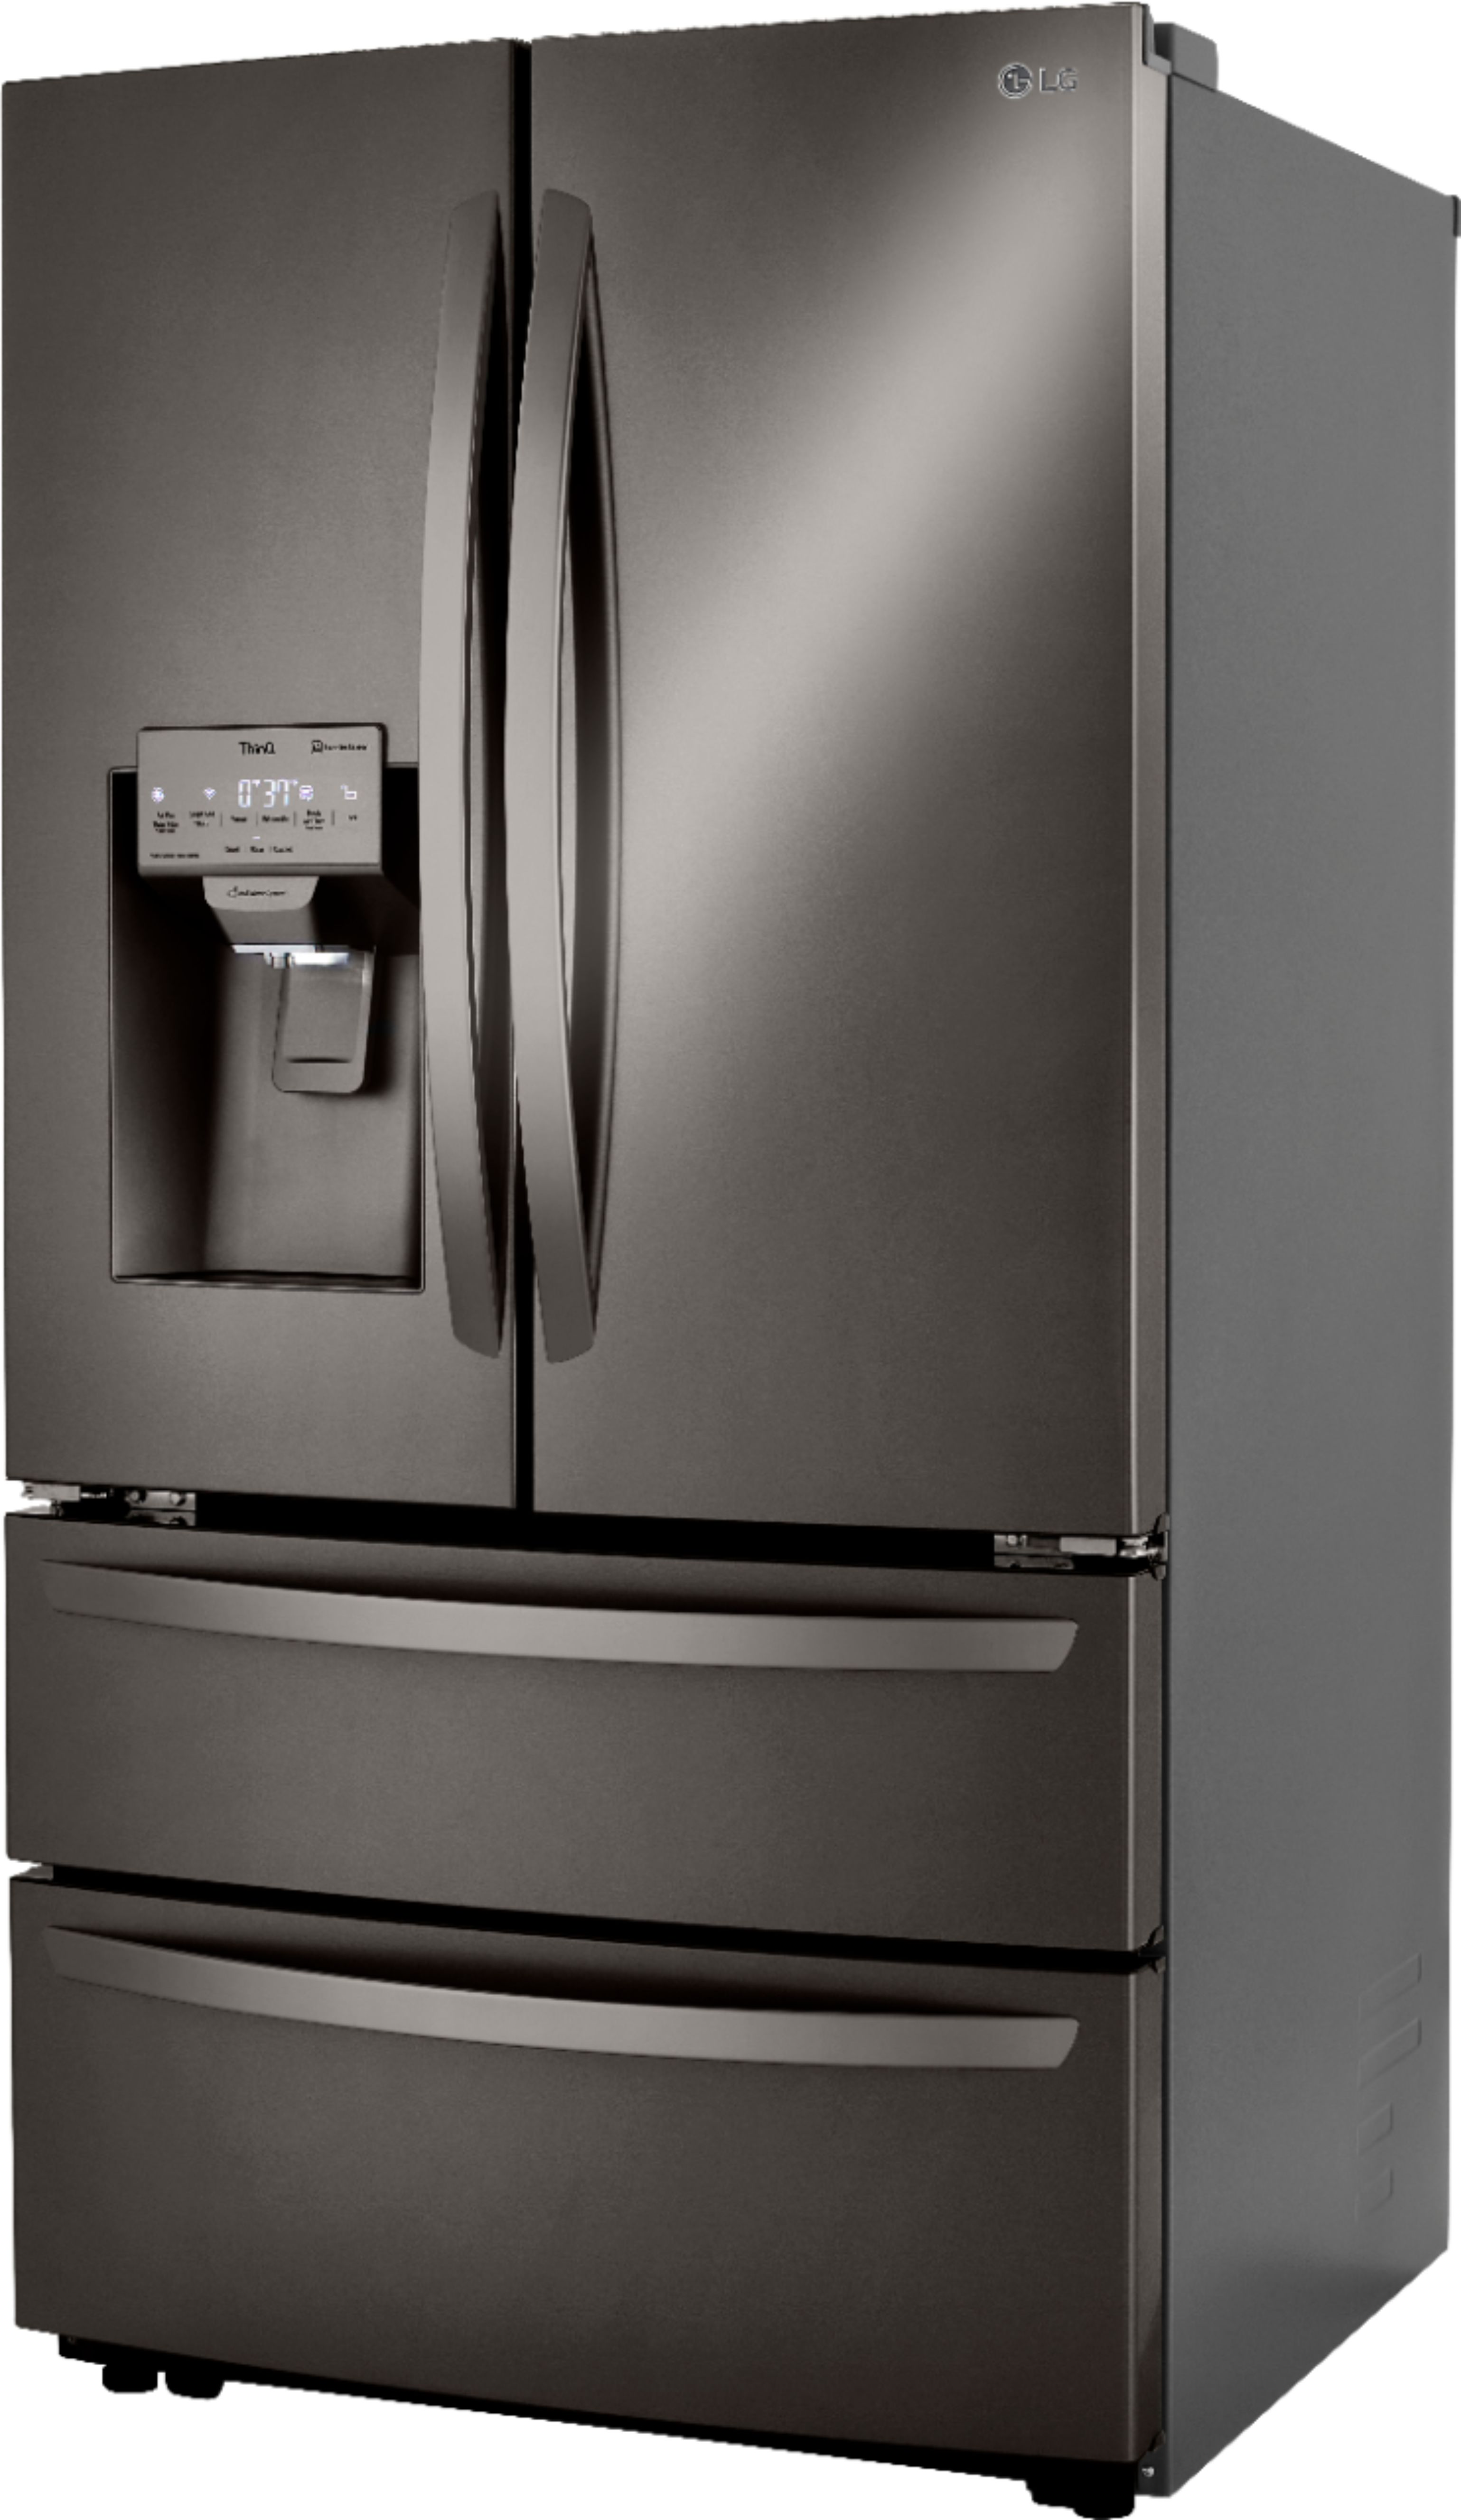 Angle View: LG - 22 cu ft 4-Door French Door Refrigerator with WiFi - Black stainless steel